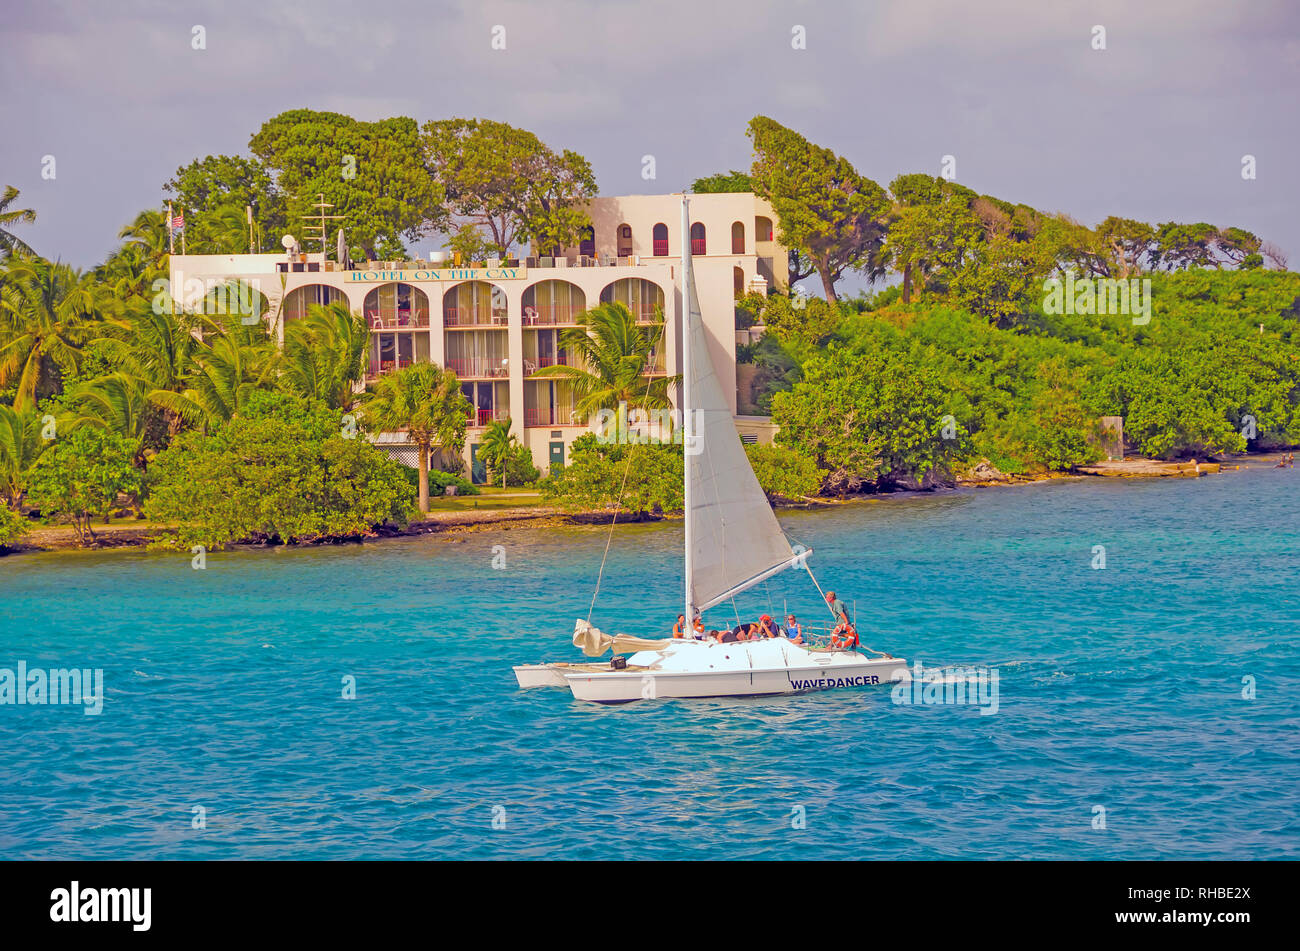 Hotel on the Cay  on Protestant  Cay  just  off Christiansted  Saint Croix,U.S. Virgin Islands Stock Photo